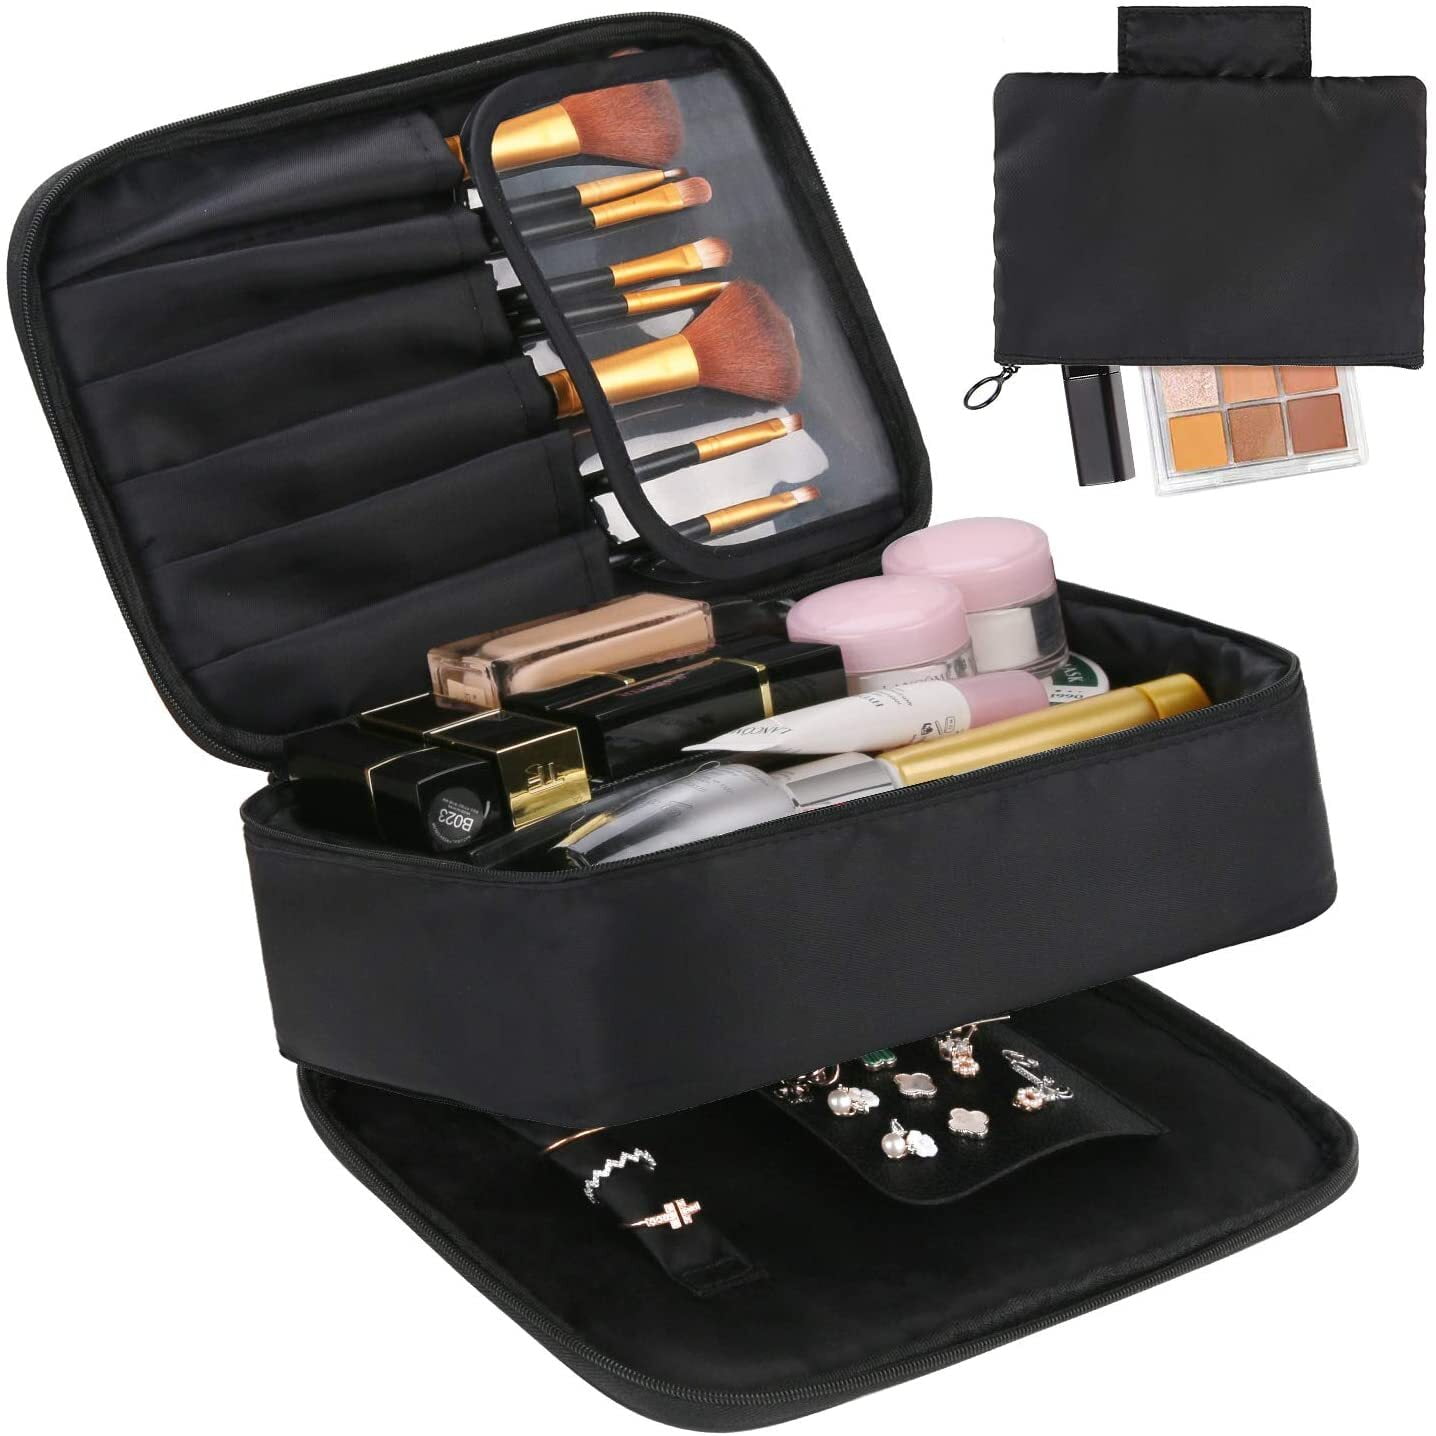 DIMJ Makeup Organizer Bag for Women, 2 in 1 Travel Jewelry Organizer Case with Compartments, Portable Makeup Bag for Cosmetics Brushes Necklaces Earrings Bracelets Toiletry Black - Walmart.com